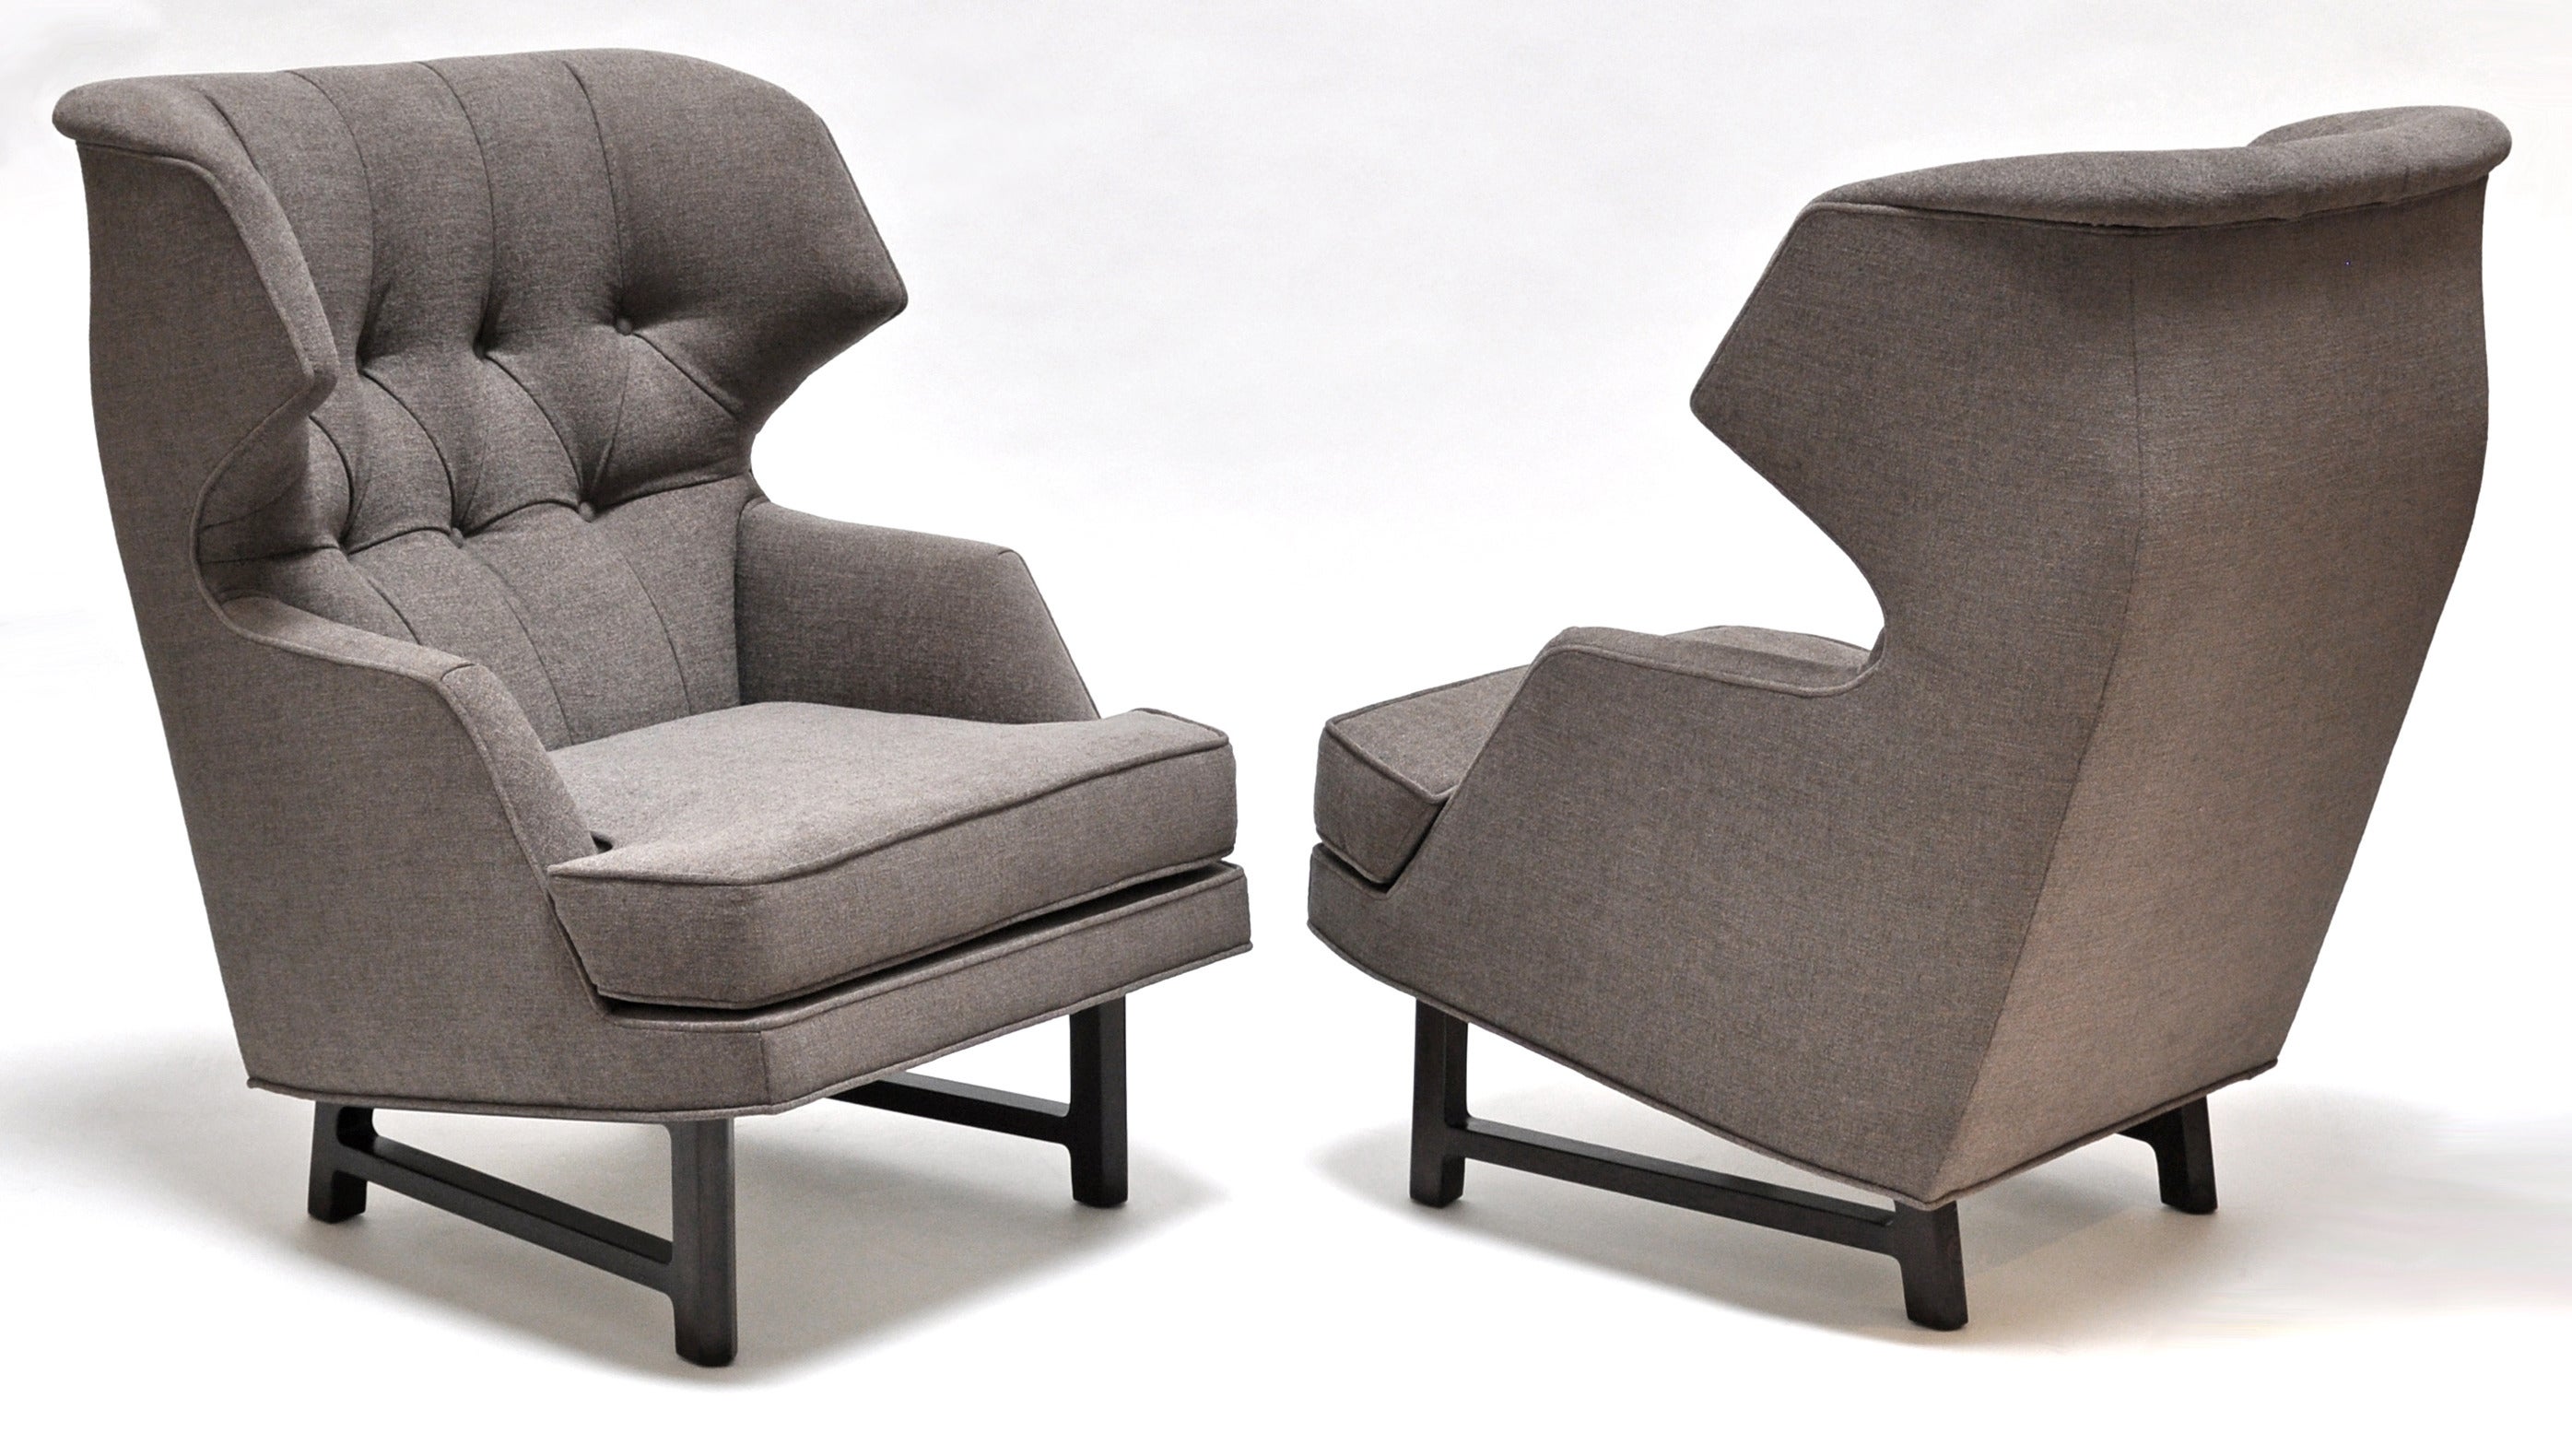 Edward Wormley (1907-1995) for Dunbar - Pair of Upholstered Chairs